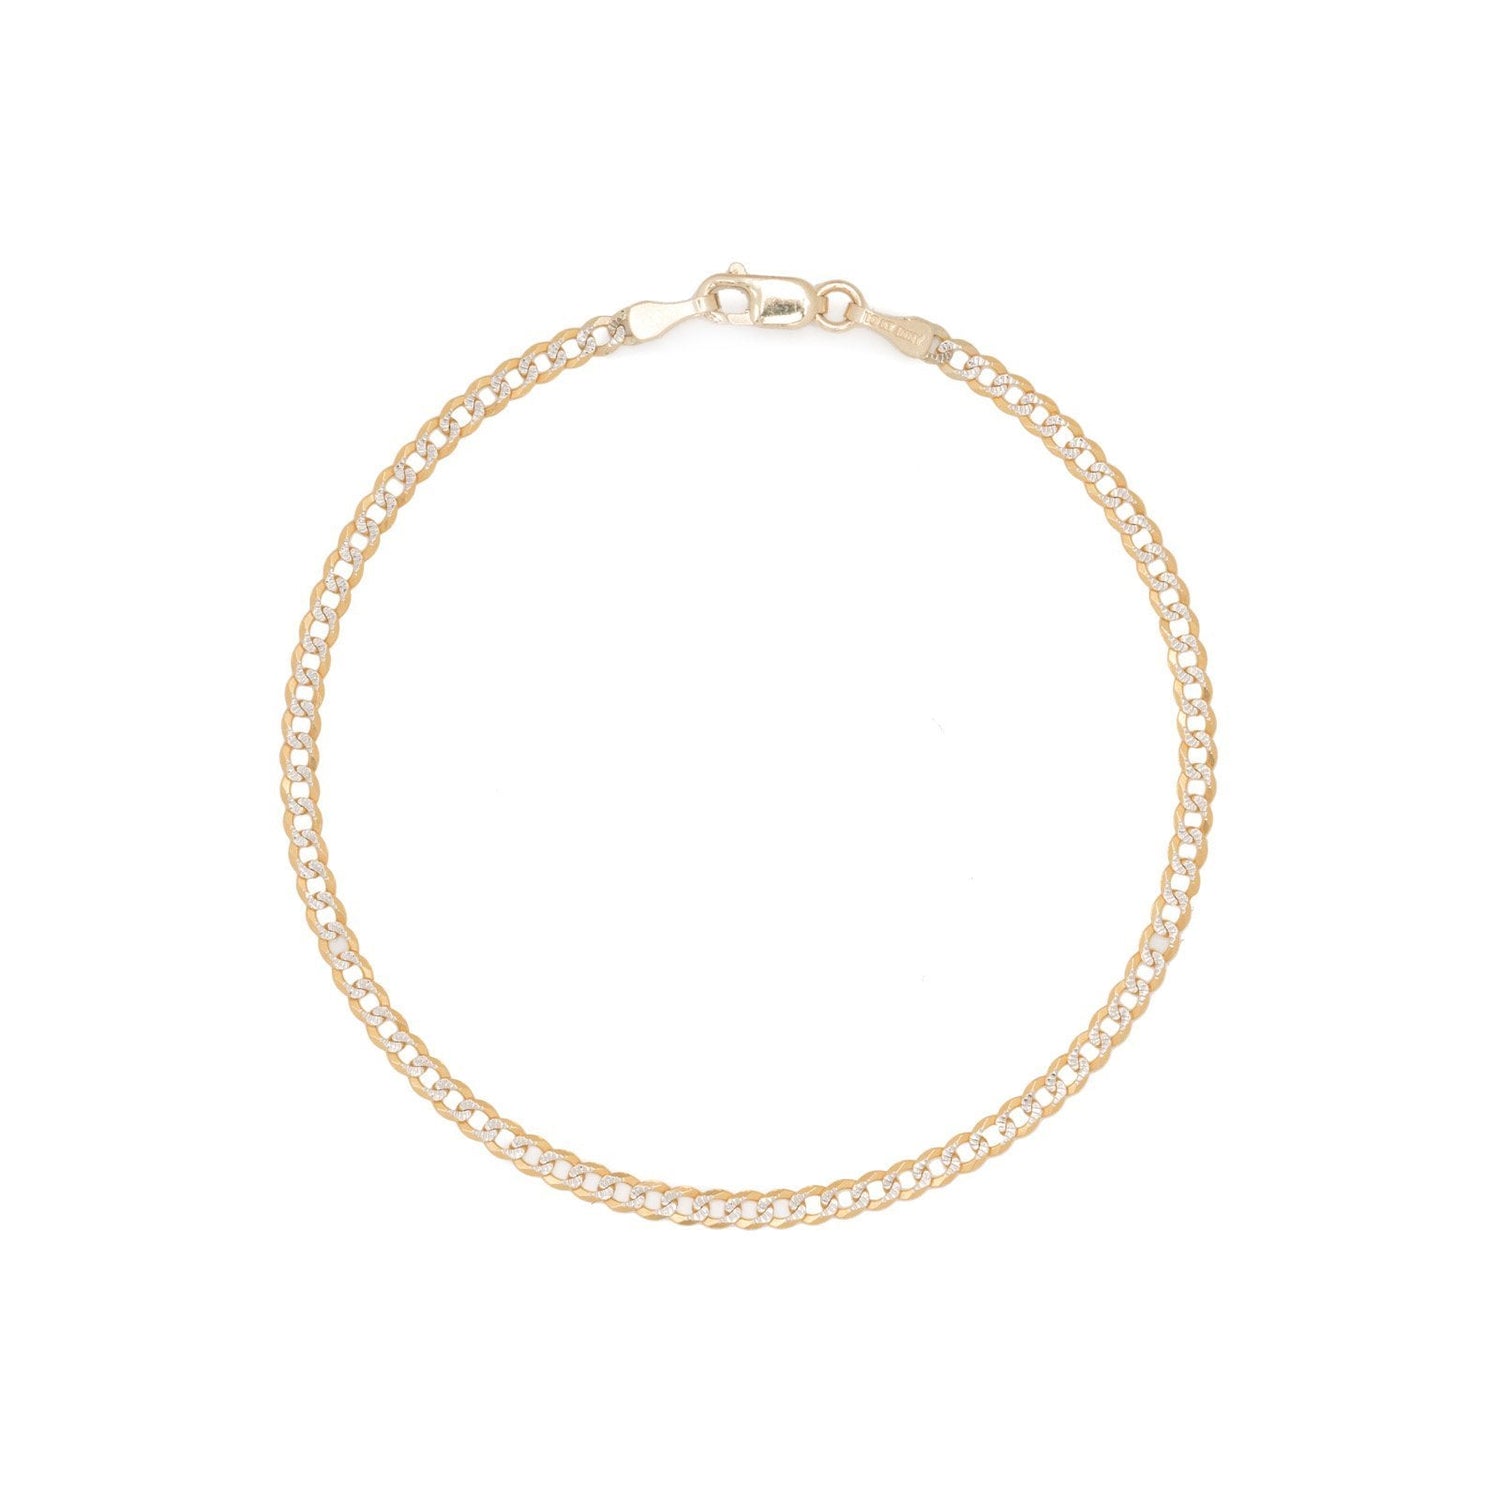 10k Two-Tone Gold Curb Cuban Chain Bracelet and Anklet with White Pave, 0.1 Inch